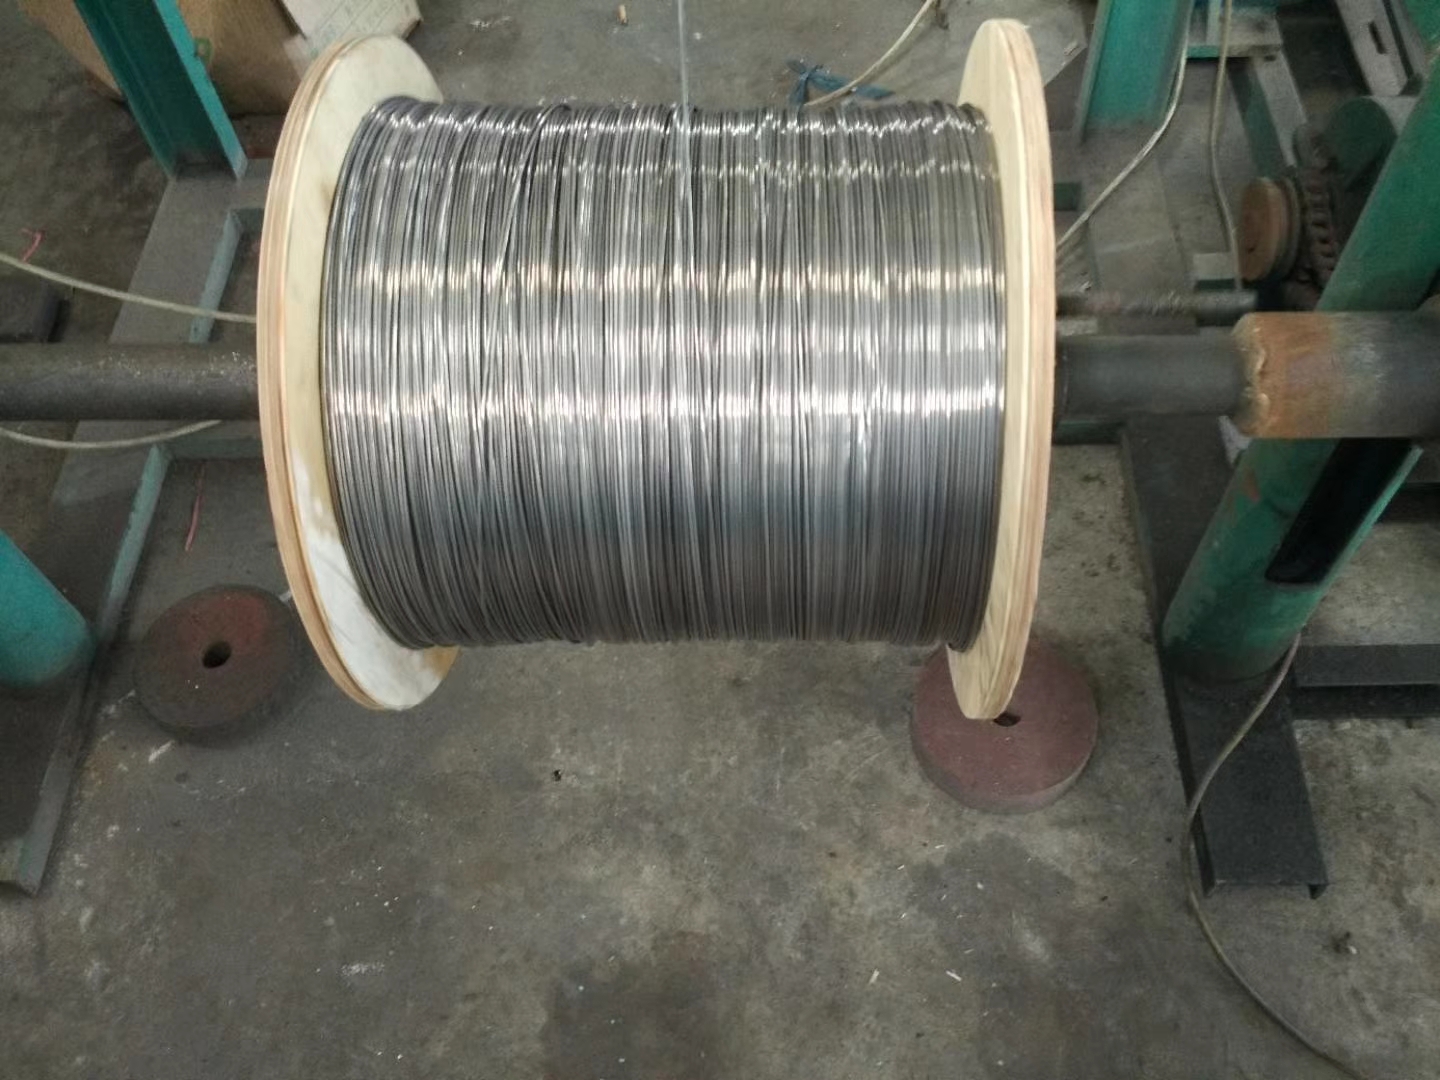 stainless steel coil tube